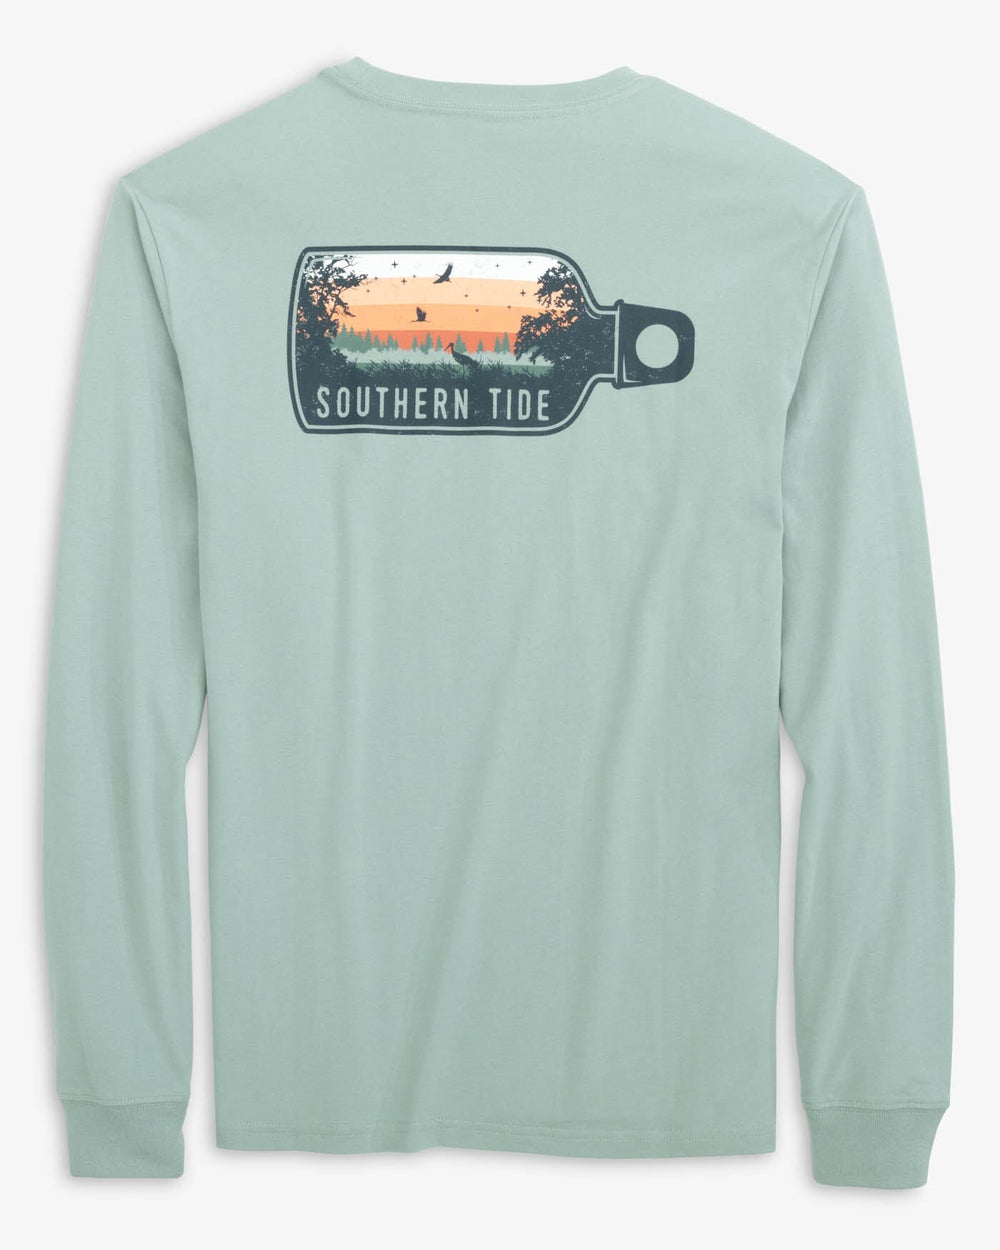 The back view of the Southern Tide Gradient Water Bottle Long Sleeve T-Shirt by Southern Tide - Sawgrass Green